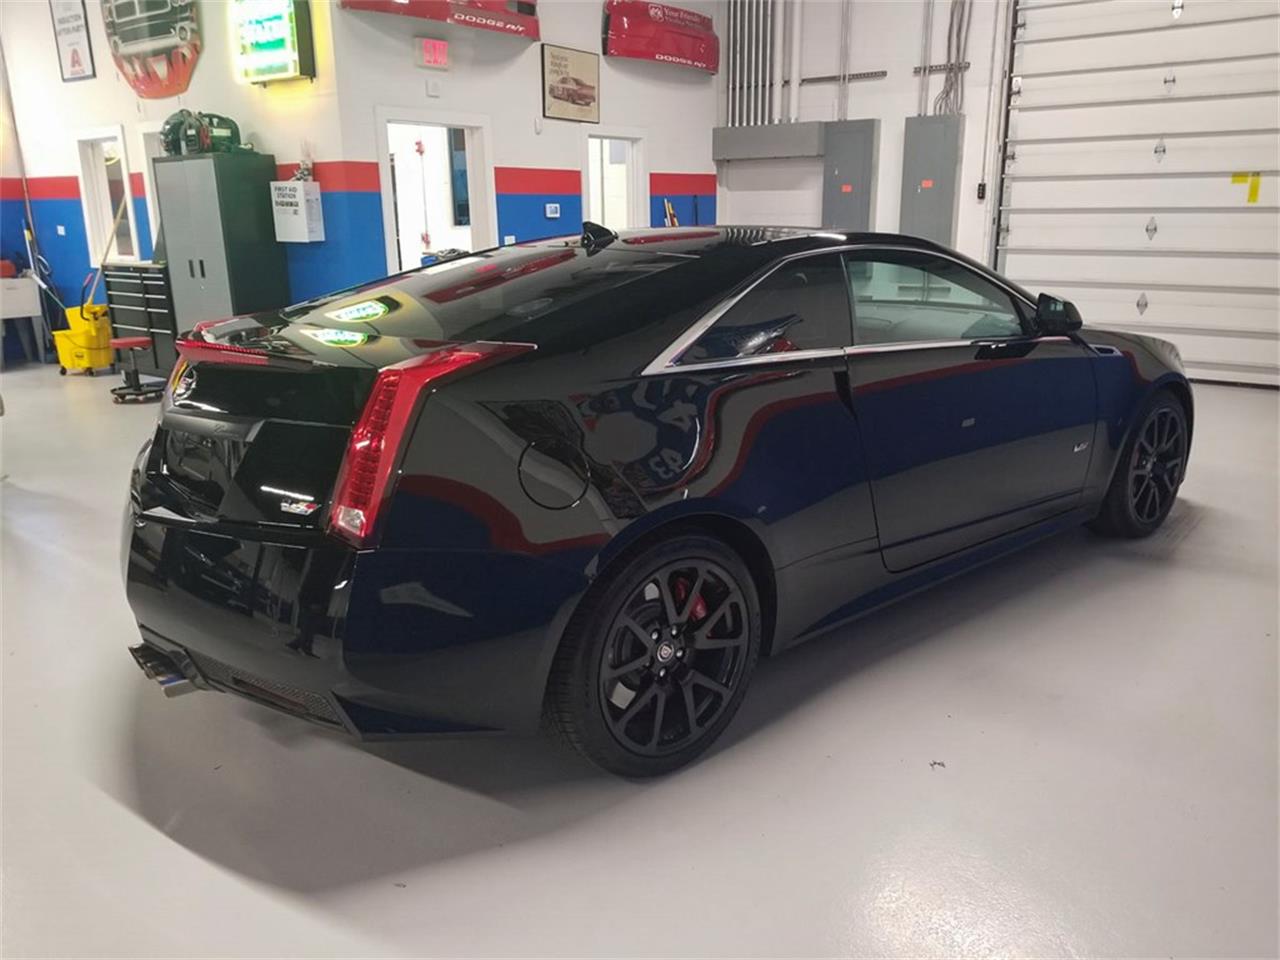 For Sale at Auction: 2014 Cadillac CTS for sale in Fort Lauderdale, FL